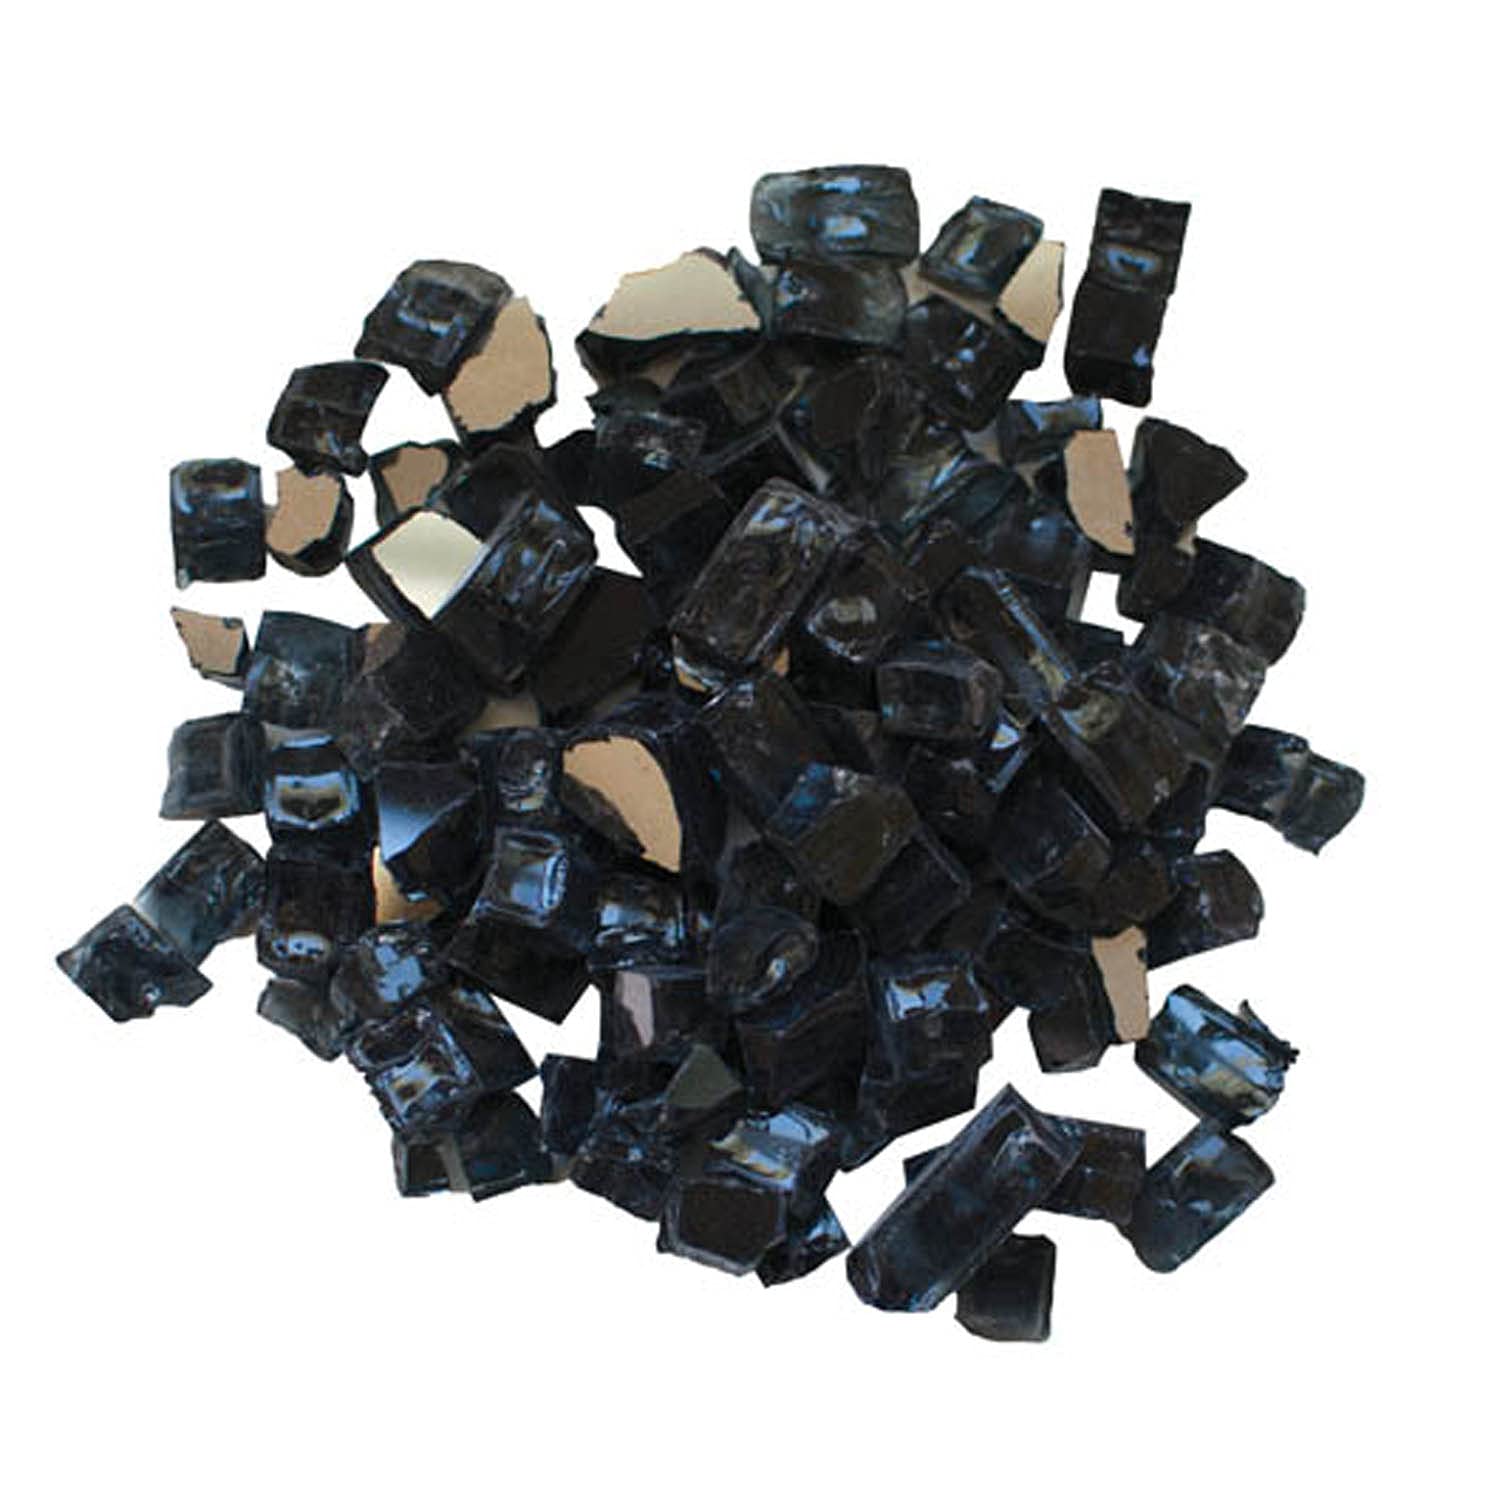 Amantii - approx. 5 lbs of 1/2" reflective fireglass - 1 sq. ft. of media coverage 'charcoal'